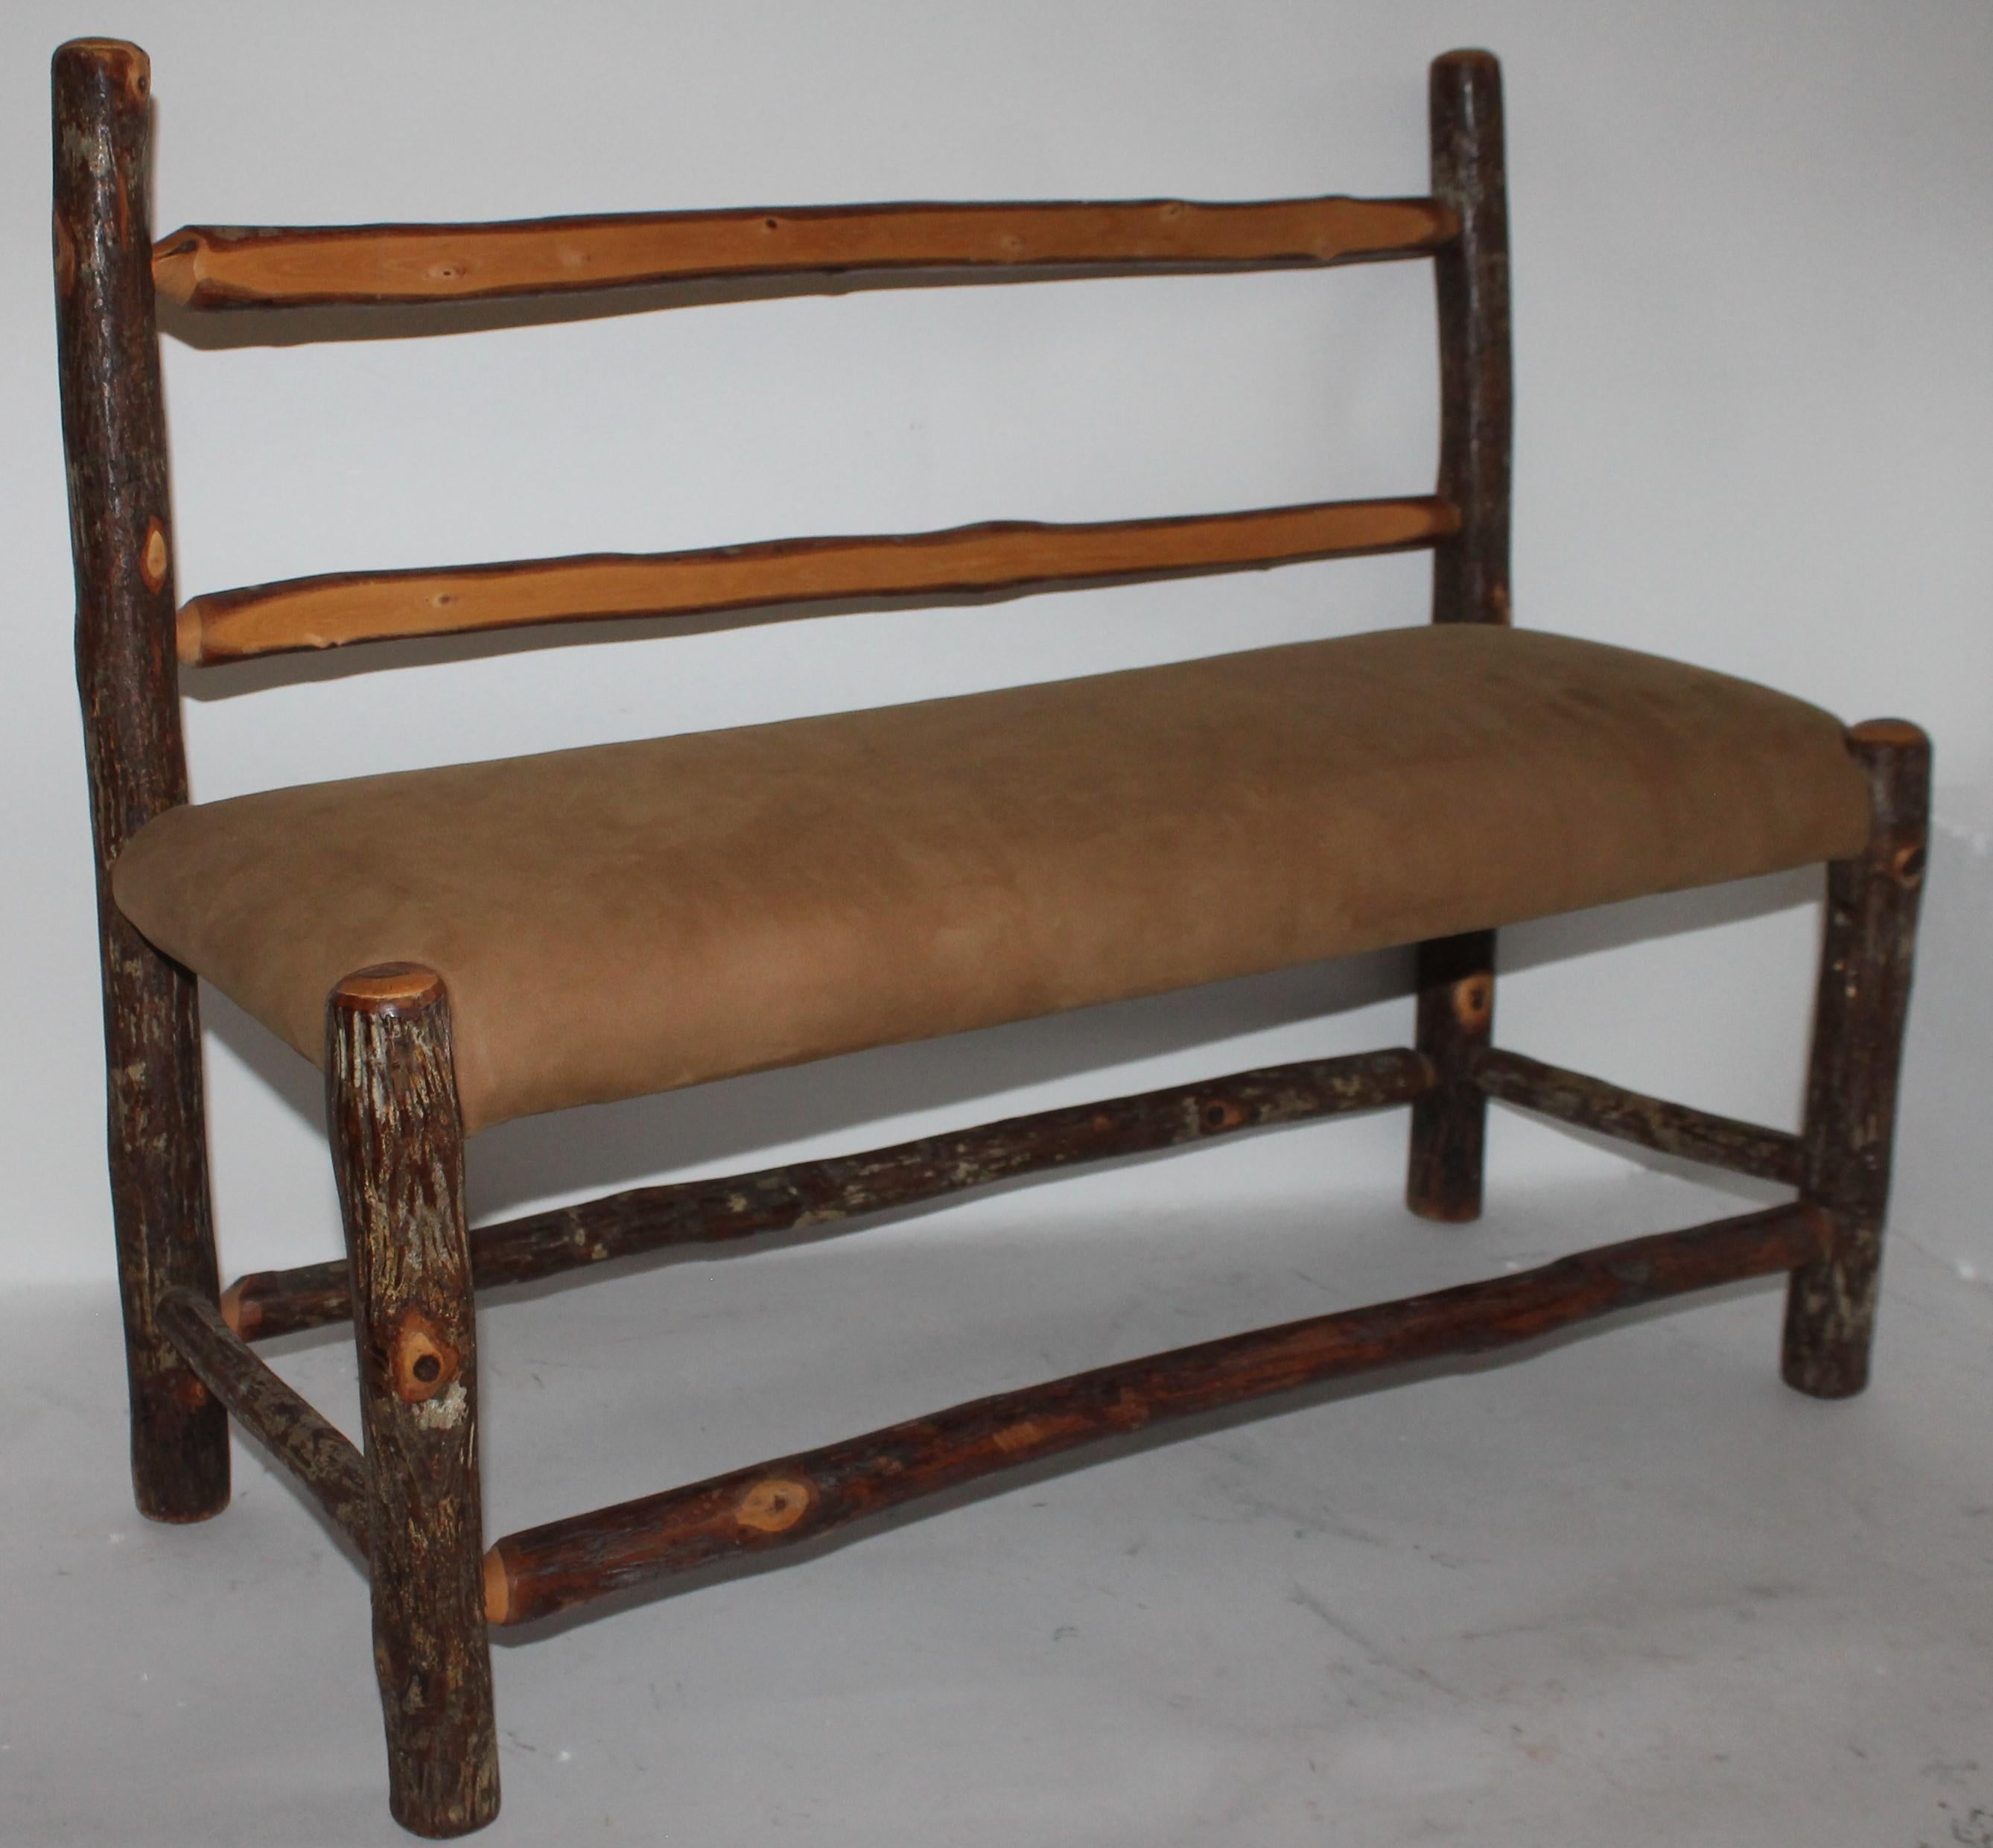 This fun handmade Old Hickory child's bench with a suede seat. It has been newly upholstered in leather.